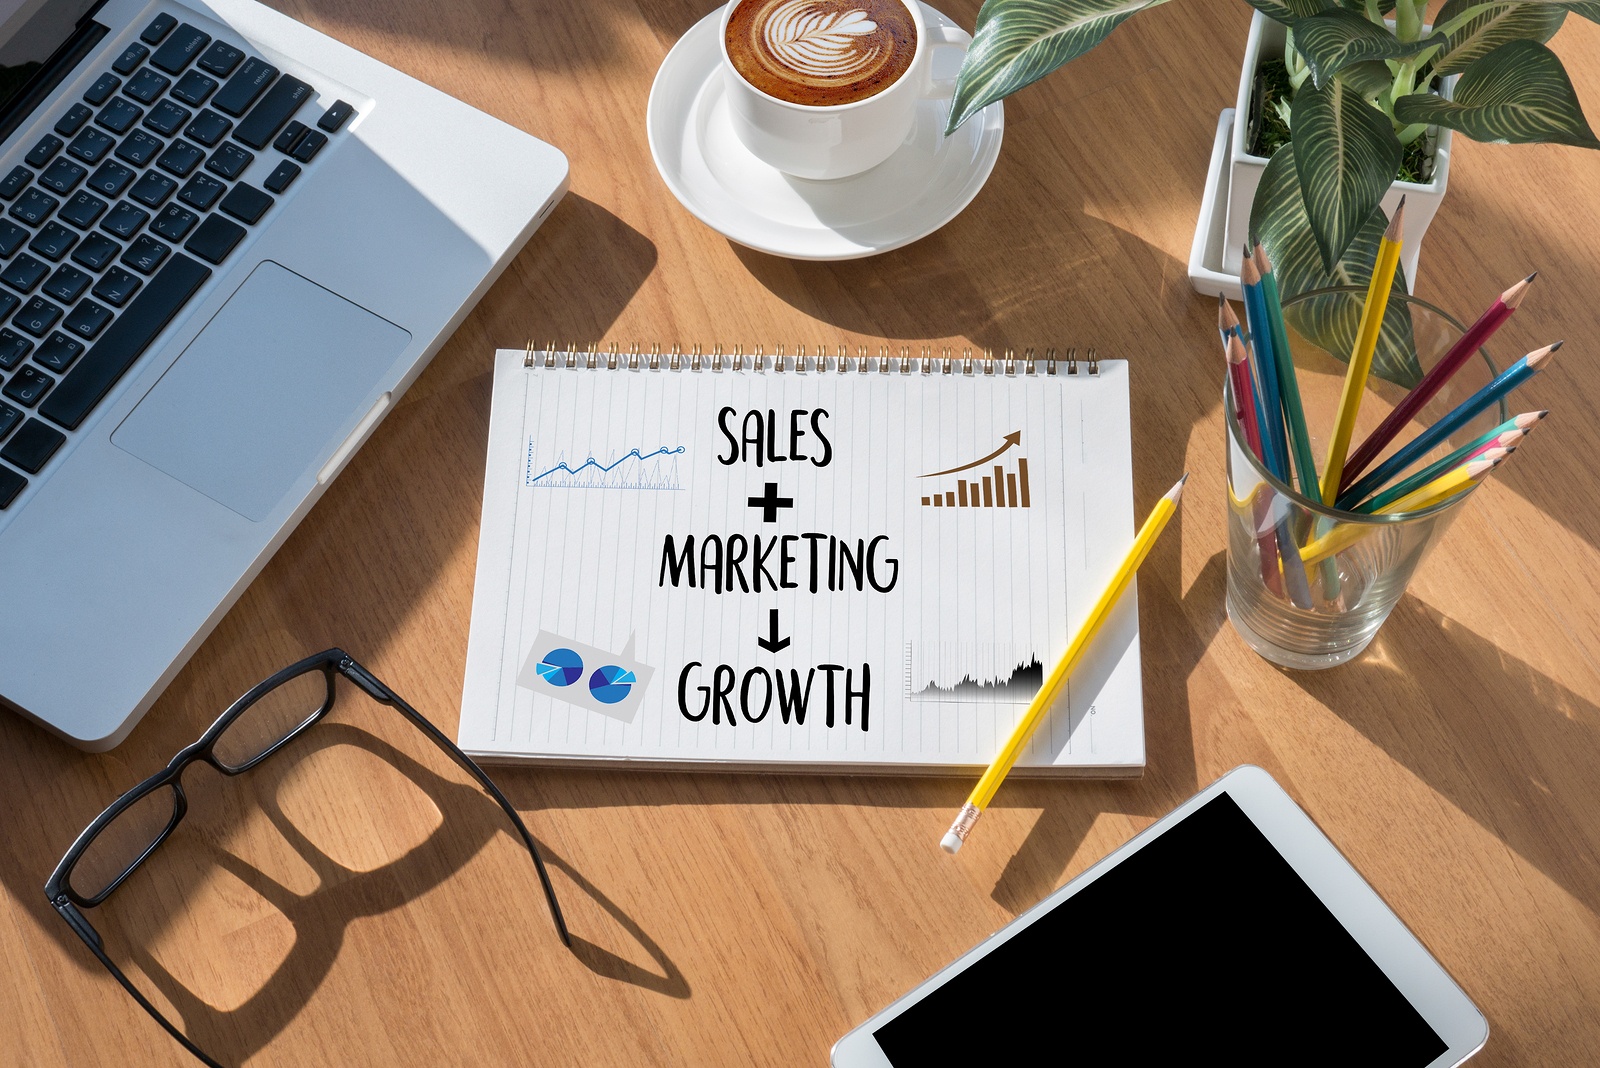 How to improve sales & marketing alignment for growth, according to 15 marketing experts